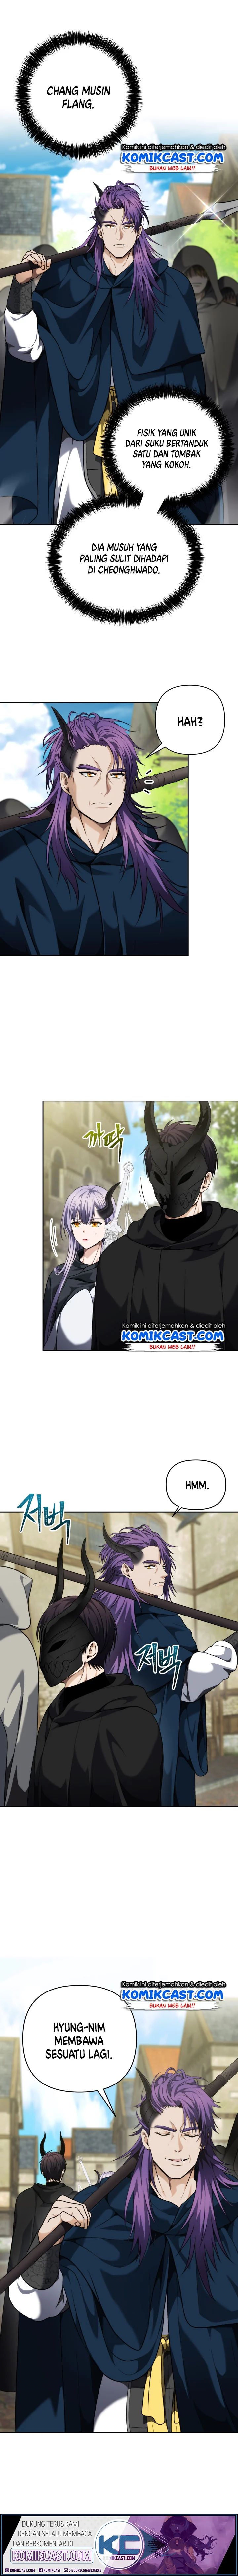 Ranker Who Lives A Second Time Chapter 74